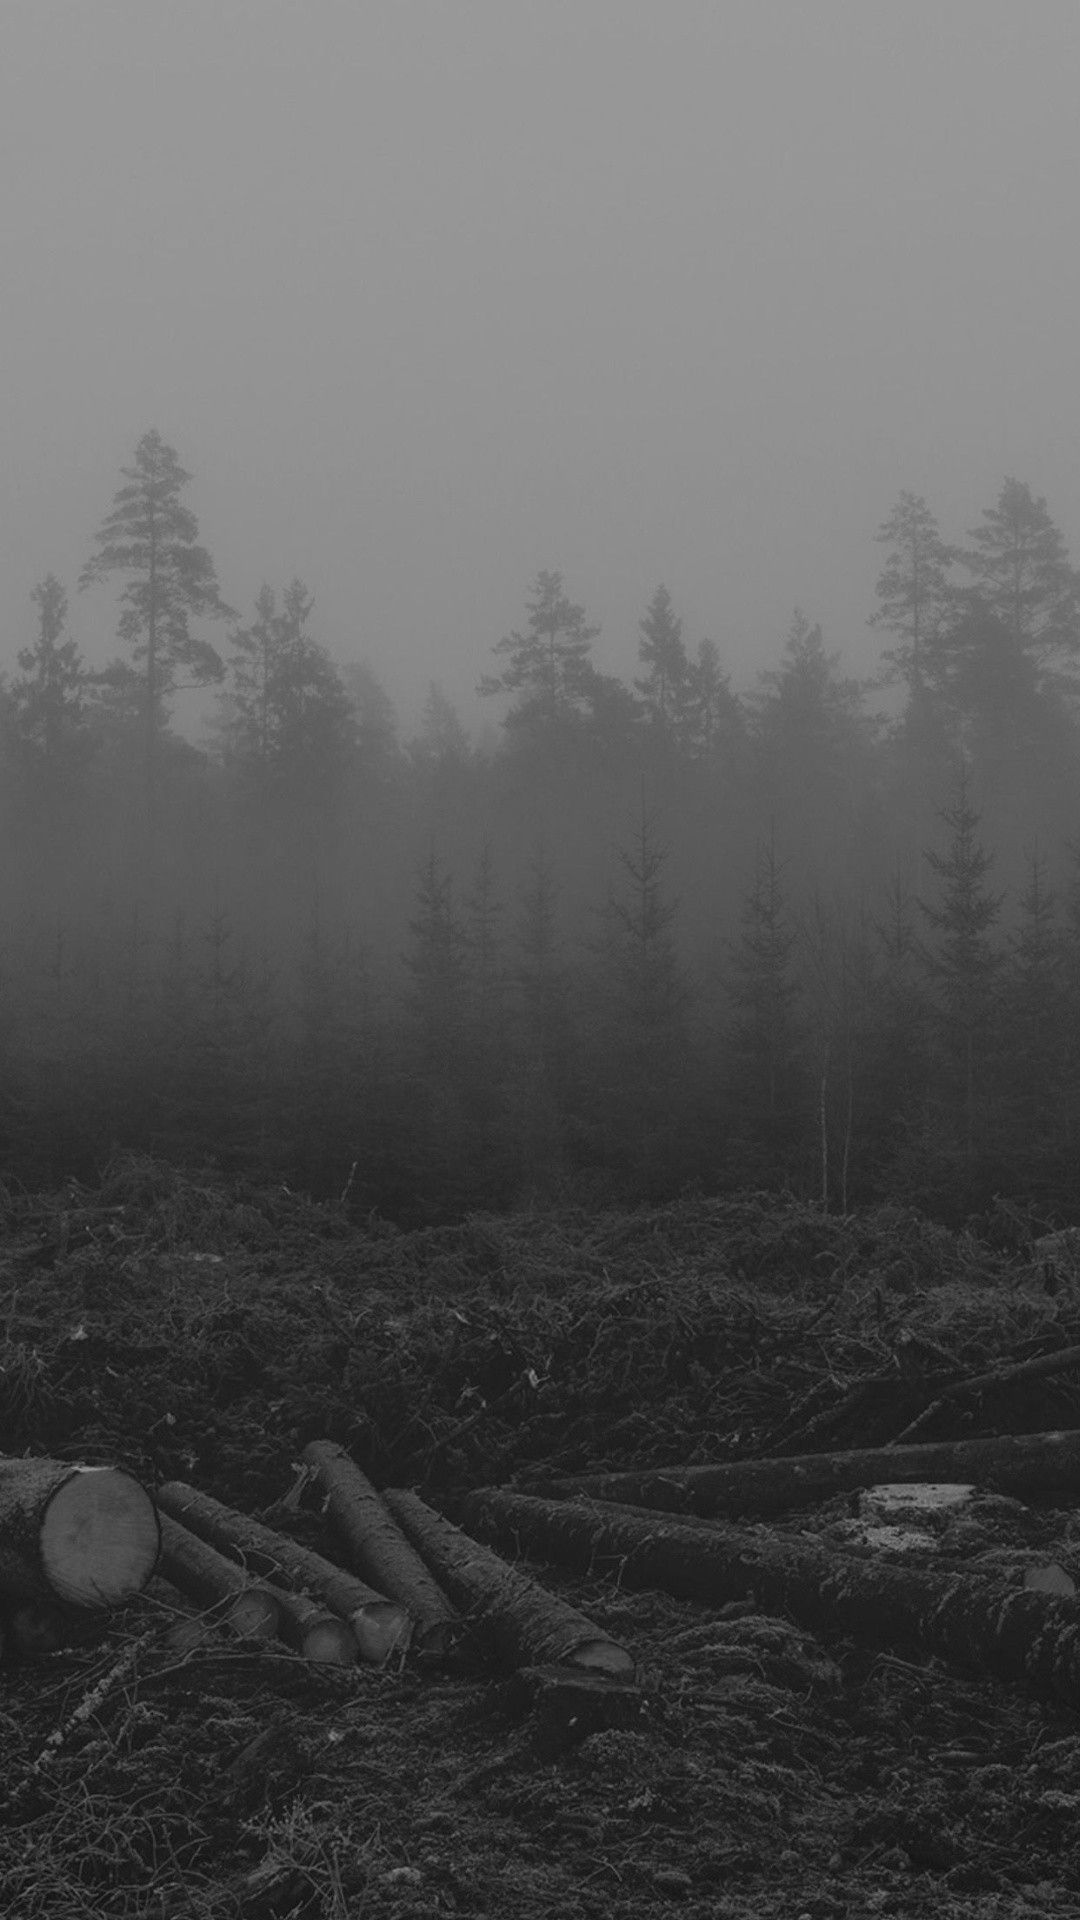 Black and white photo of a foggy forest with cut down trees - Foggy forest